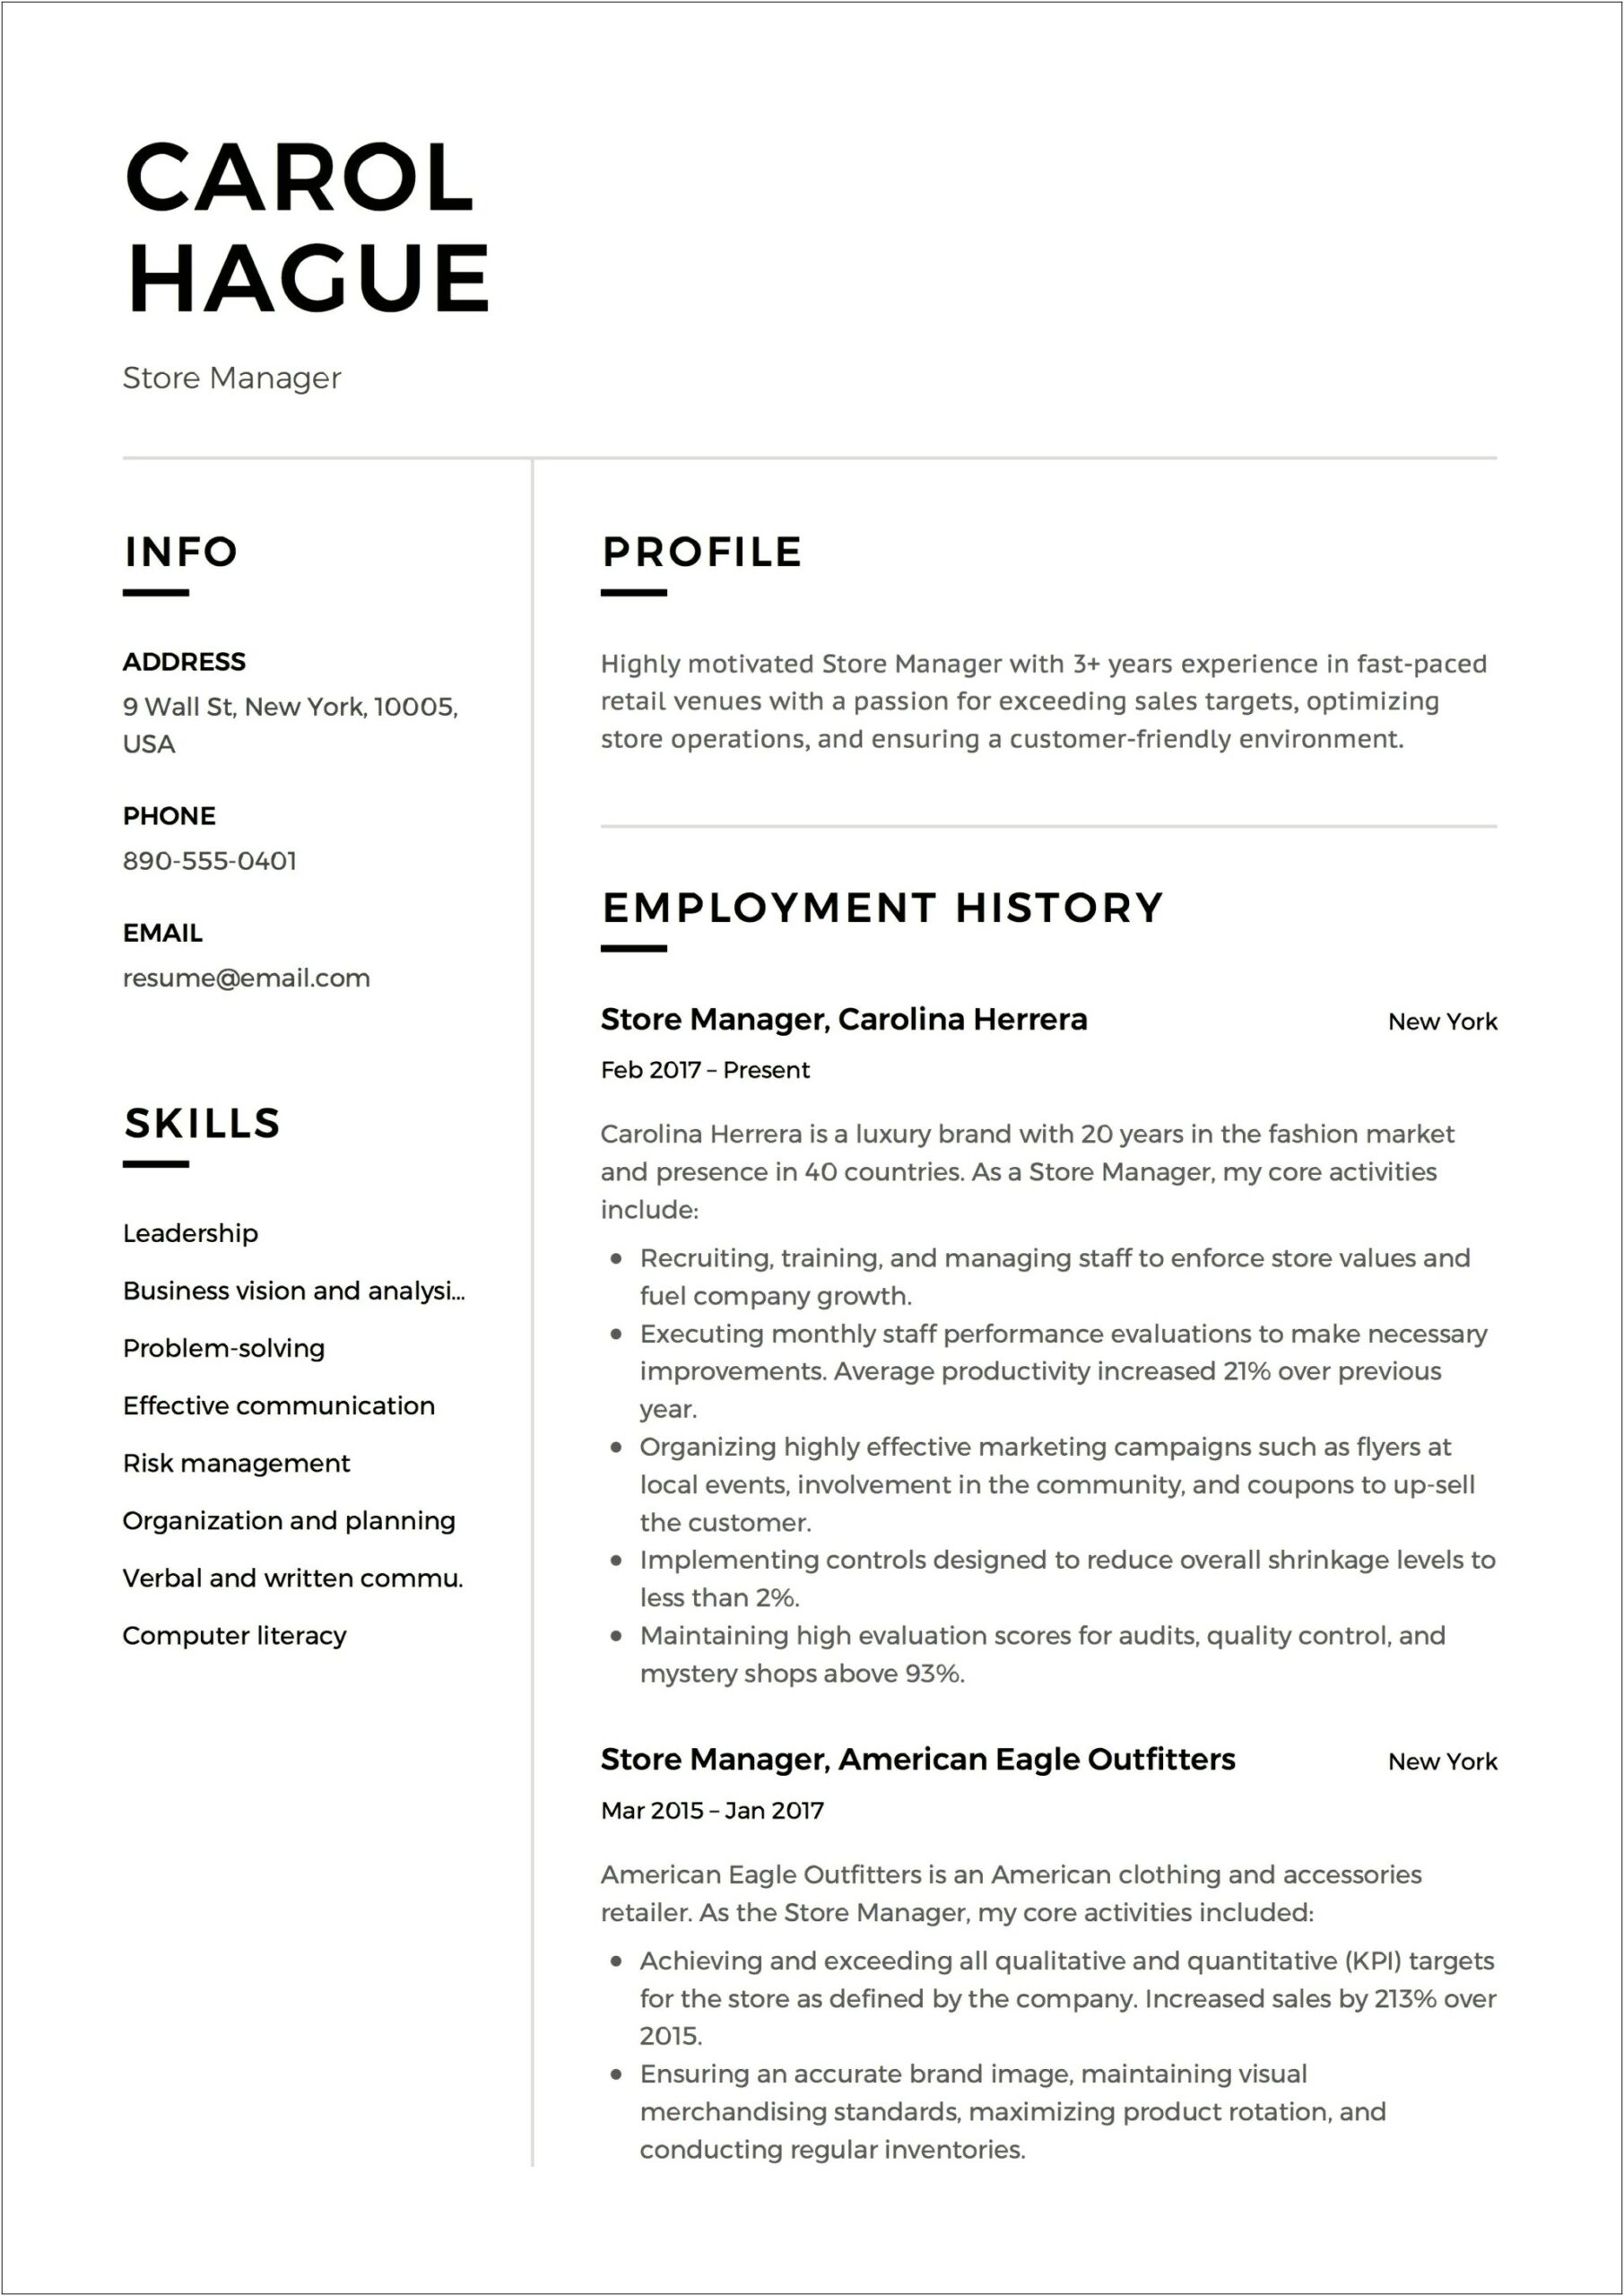 Professional Summary For Retail Management Resume